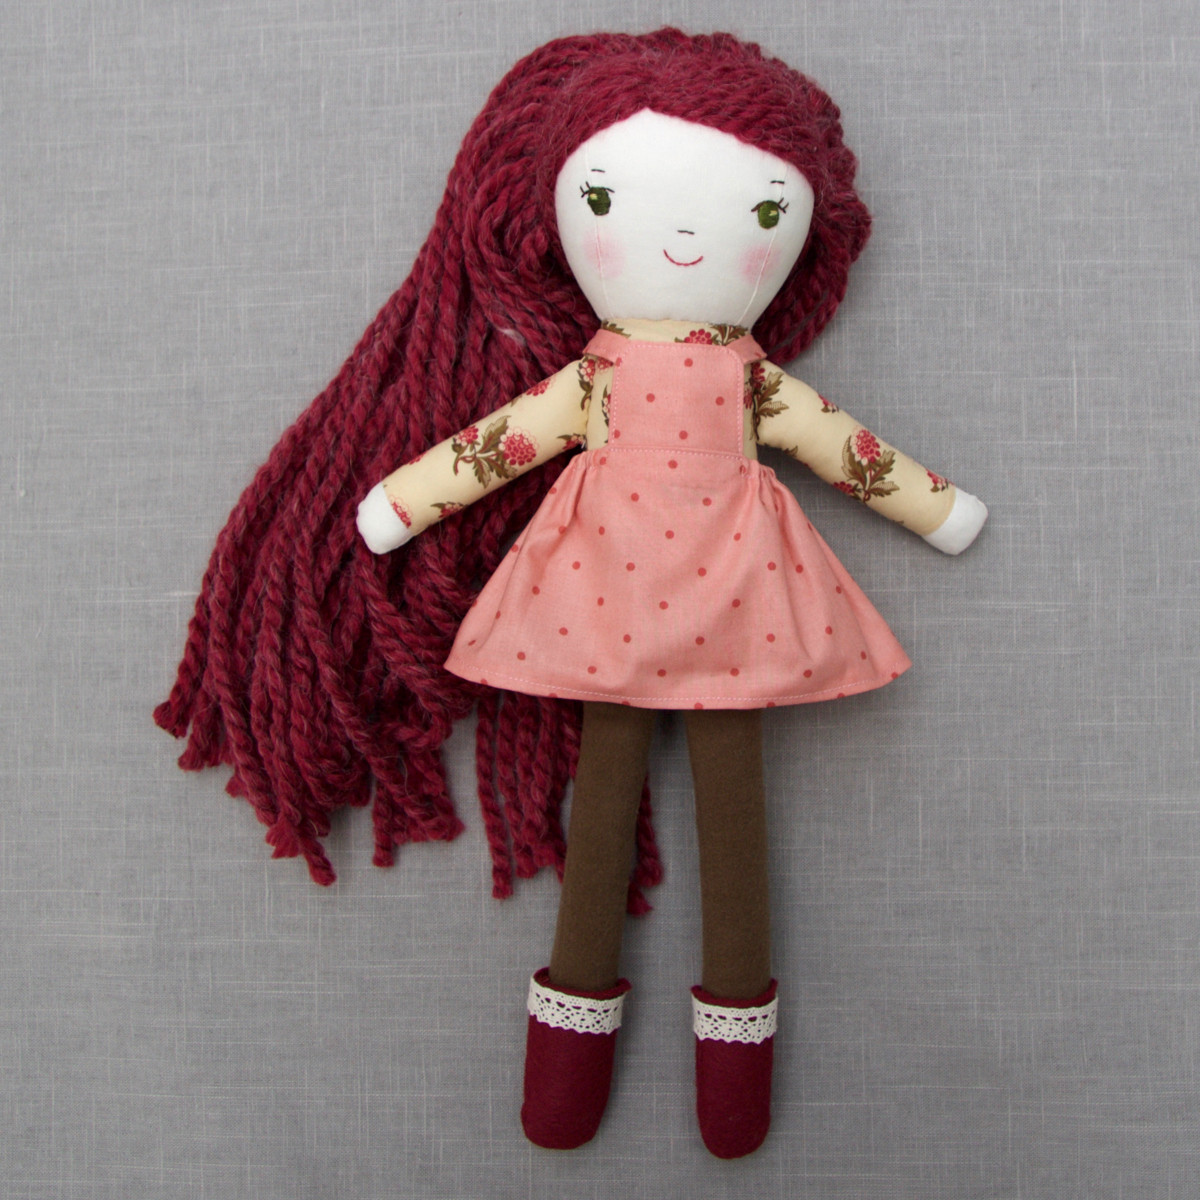 New dolls up in the shop - Wee Wonderfuls